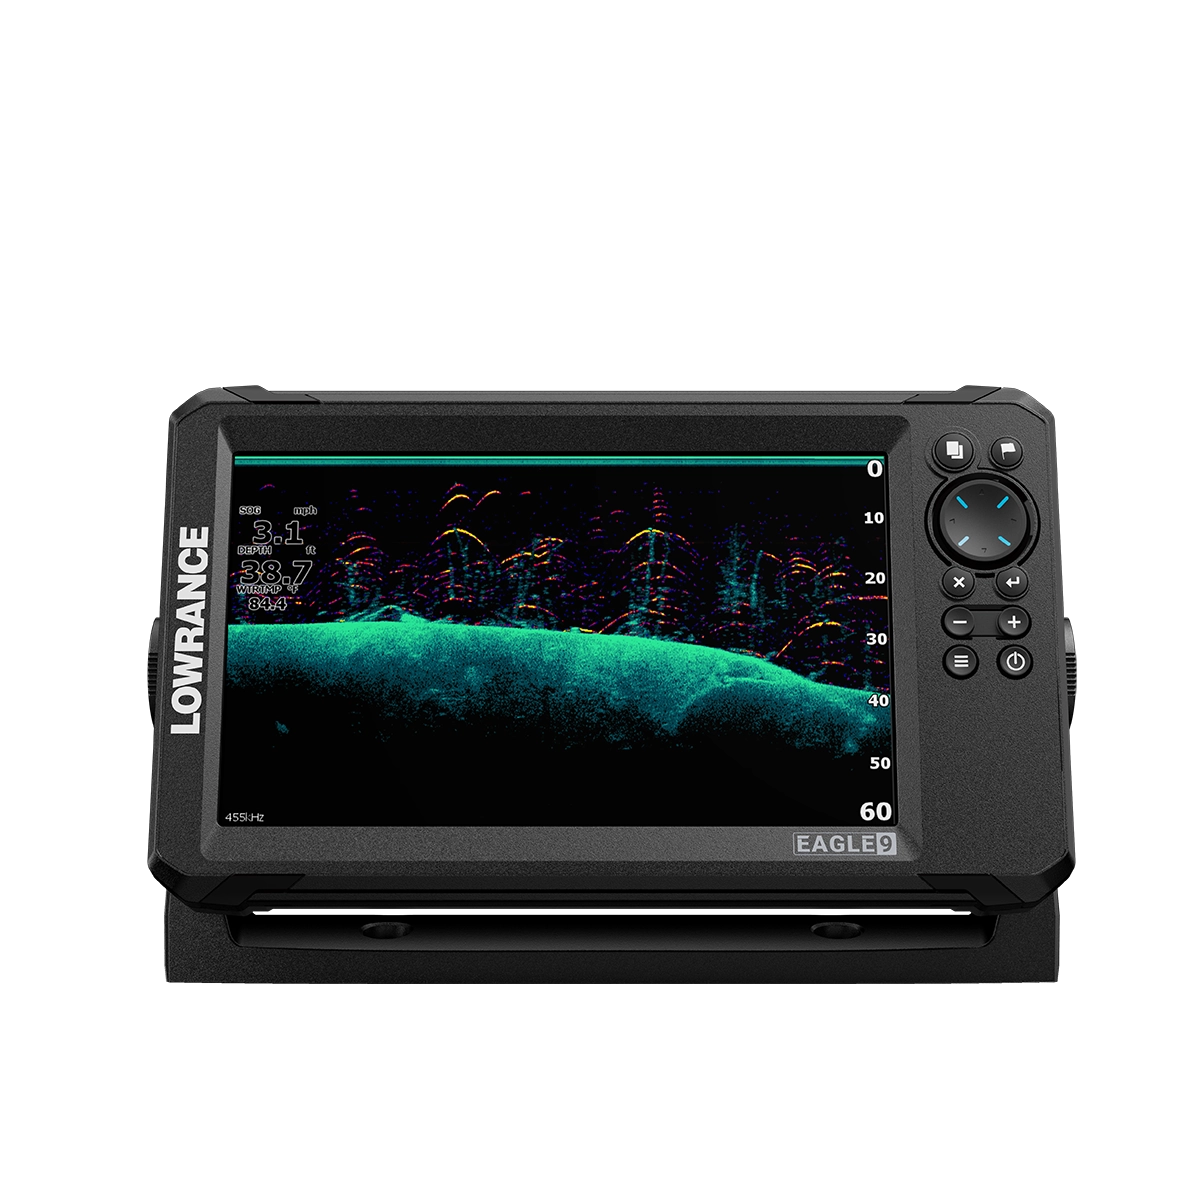 HOOK² 9 Suncover, Accessory, Lowrance